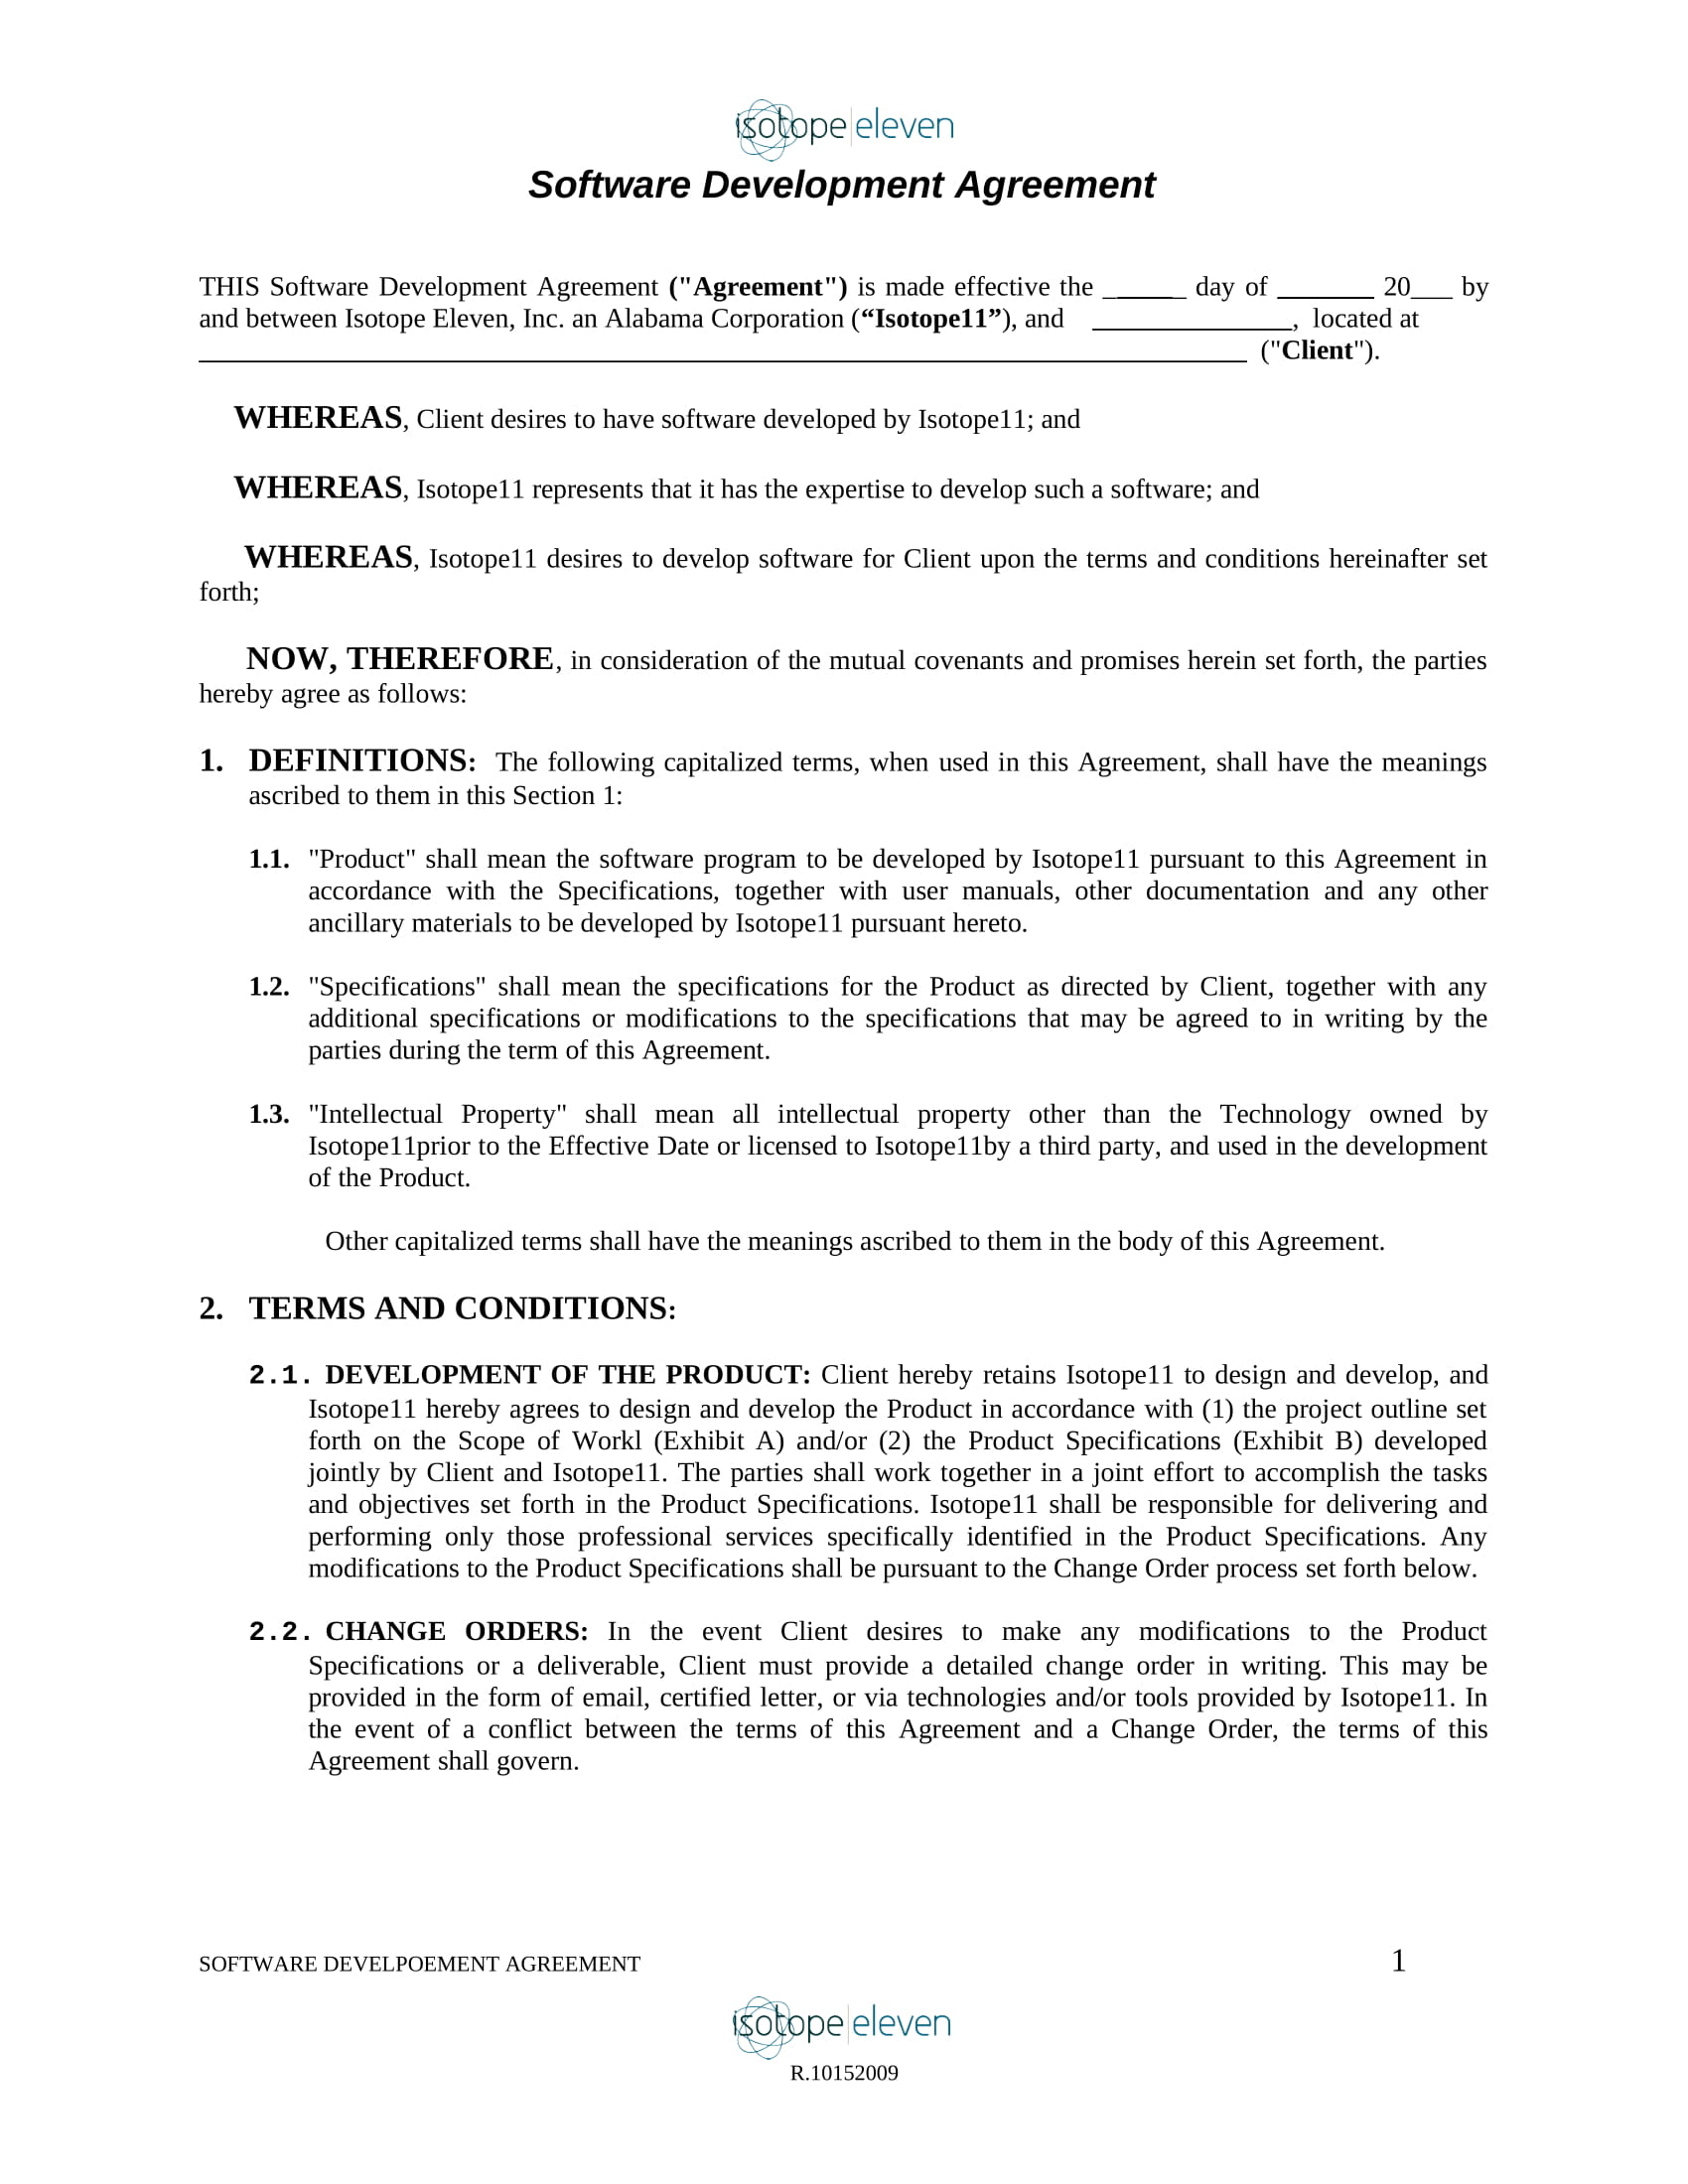 software development agreement contract form 1